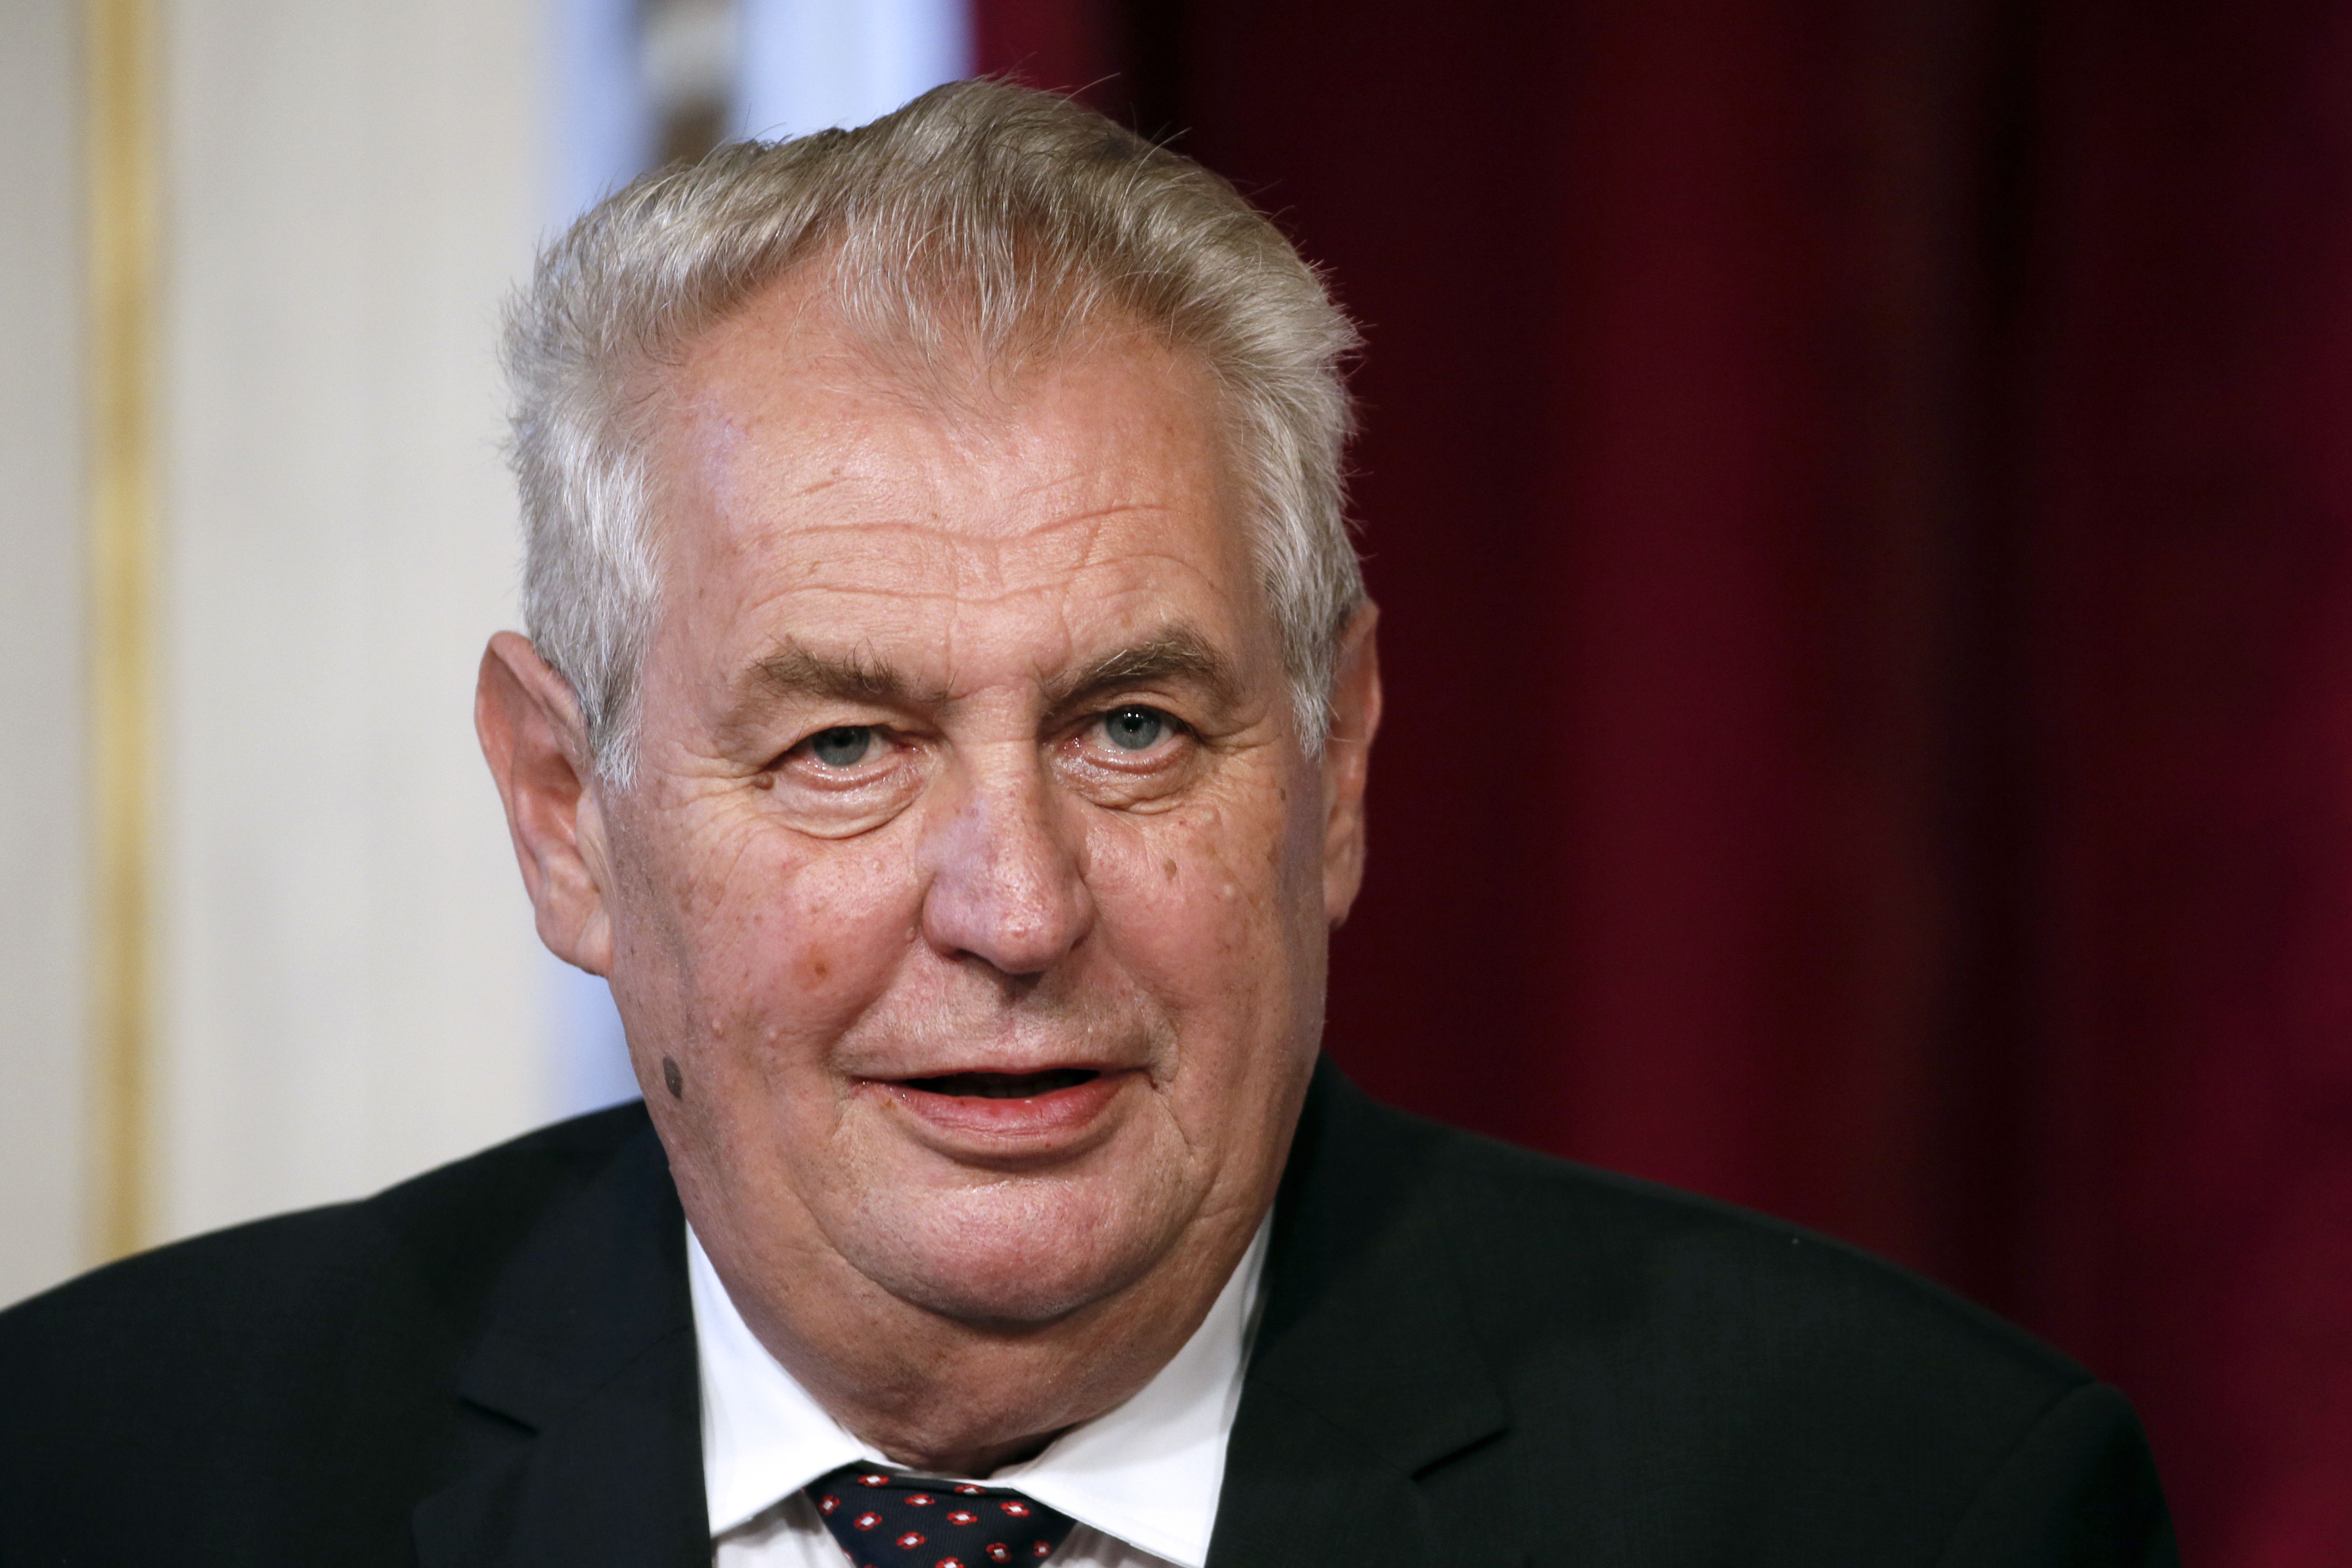 Czech president would cast ballot for Trump in US vote